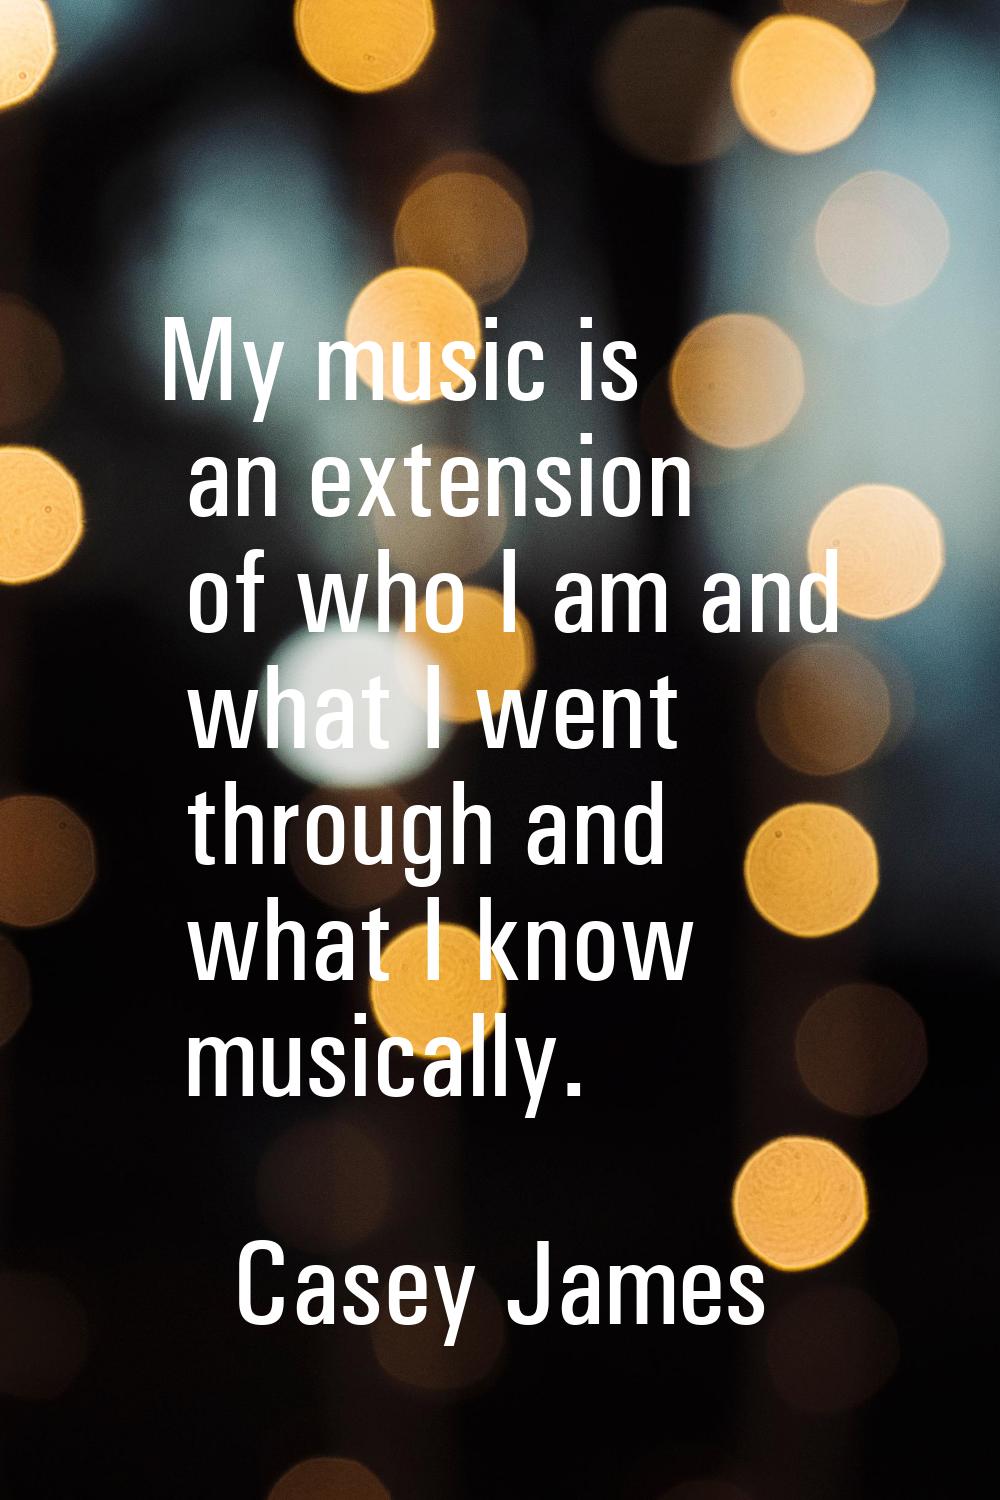 My music is an extension of who I am and what I went through and what I know musically.